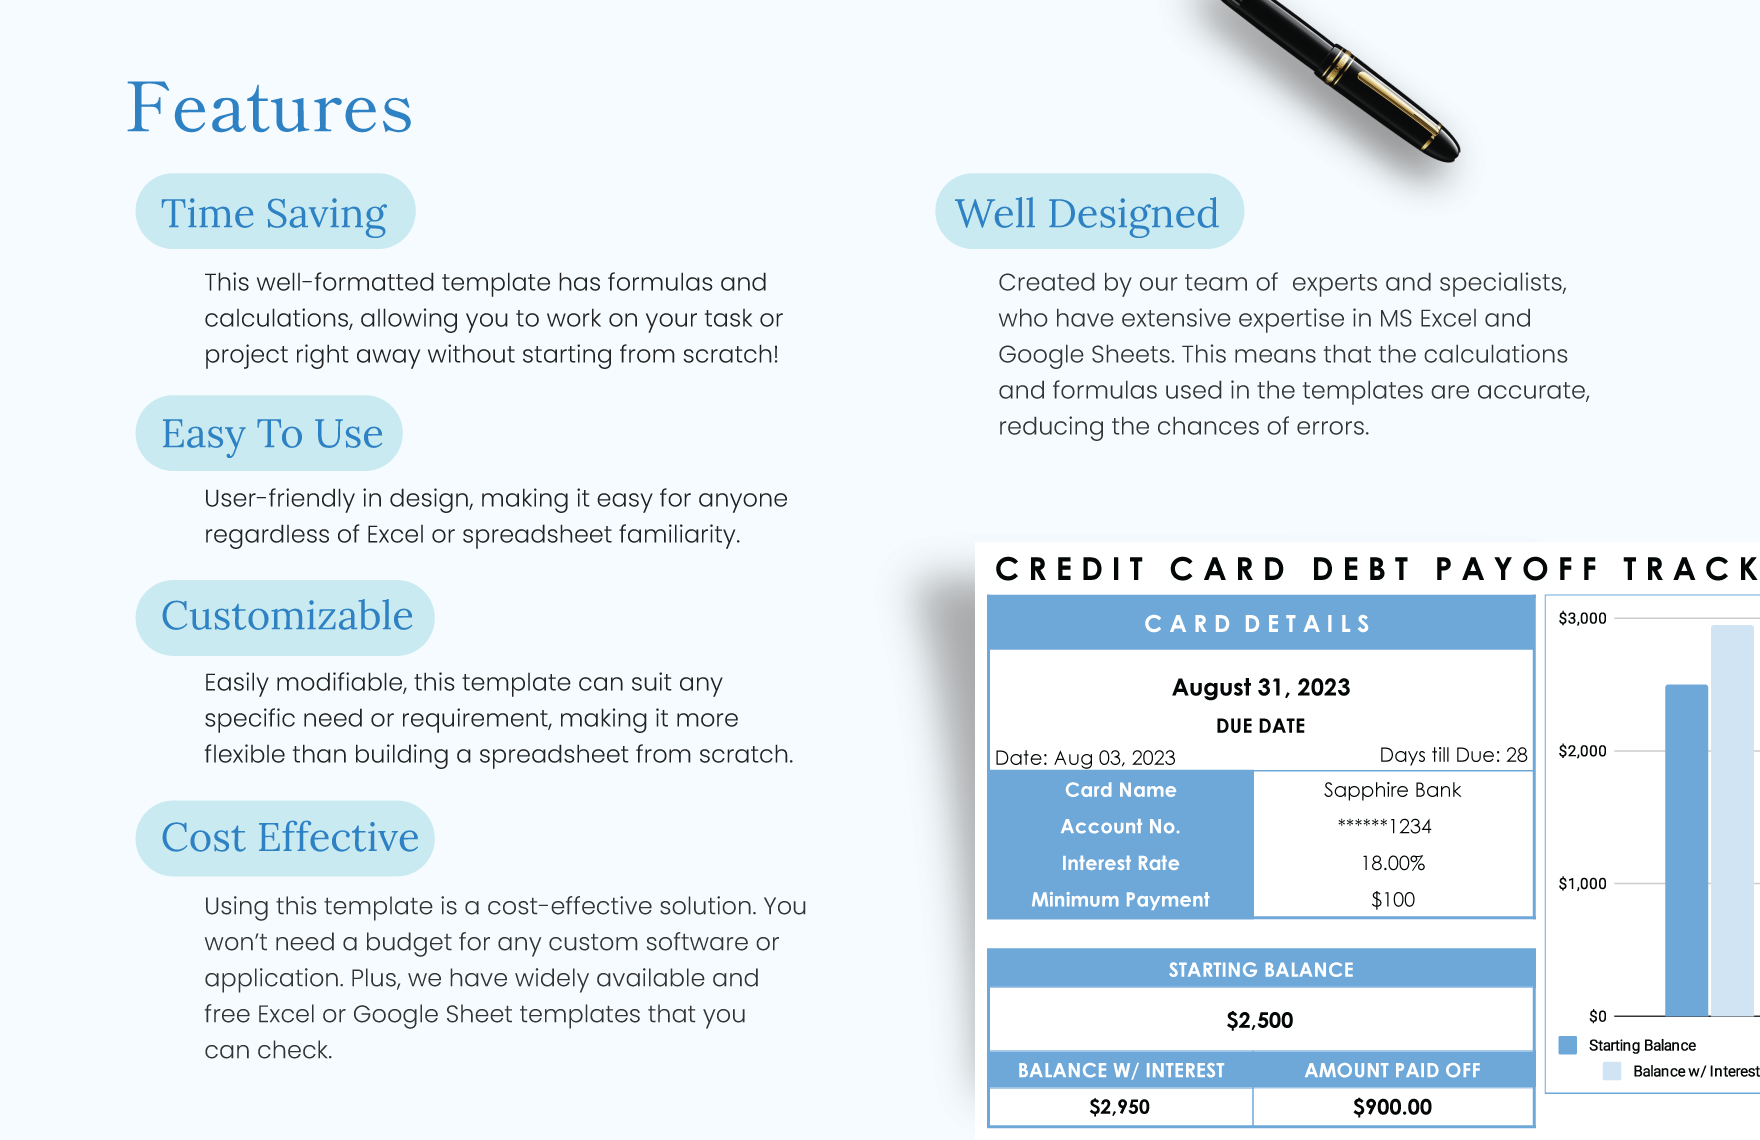 Credit Card Debt Payoff Tracker Template